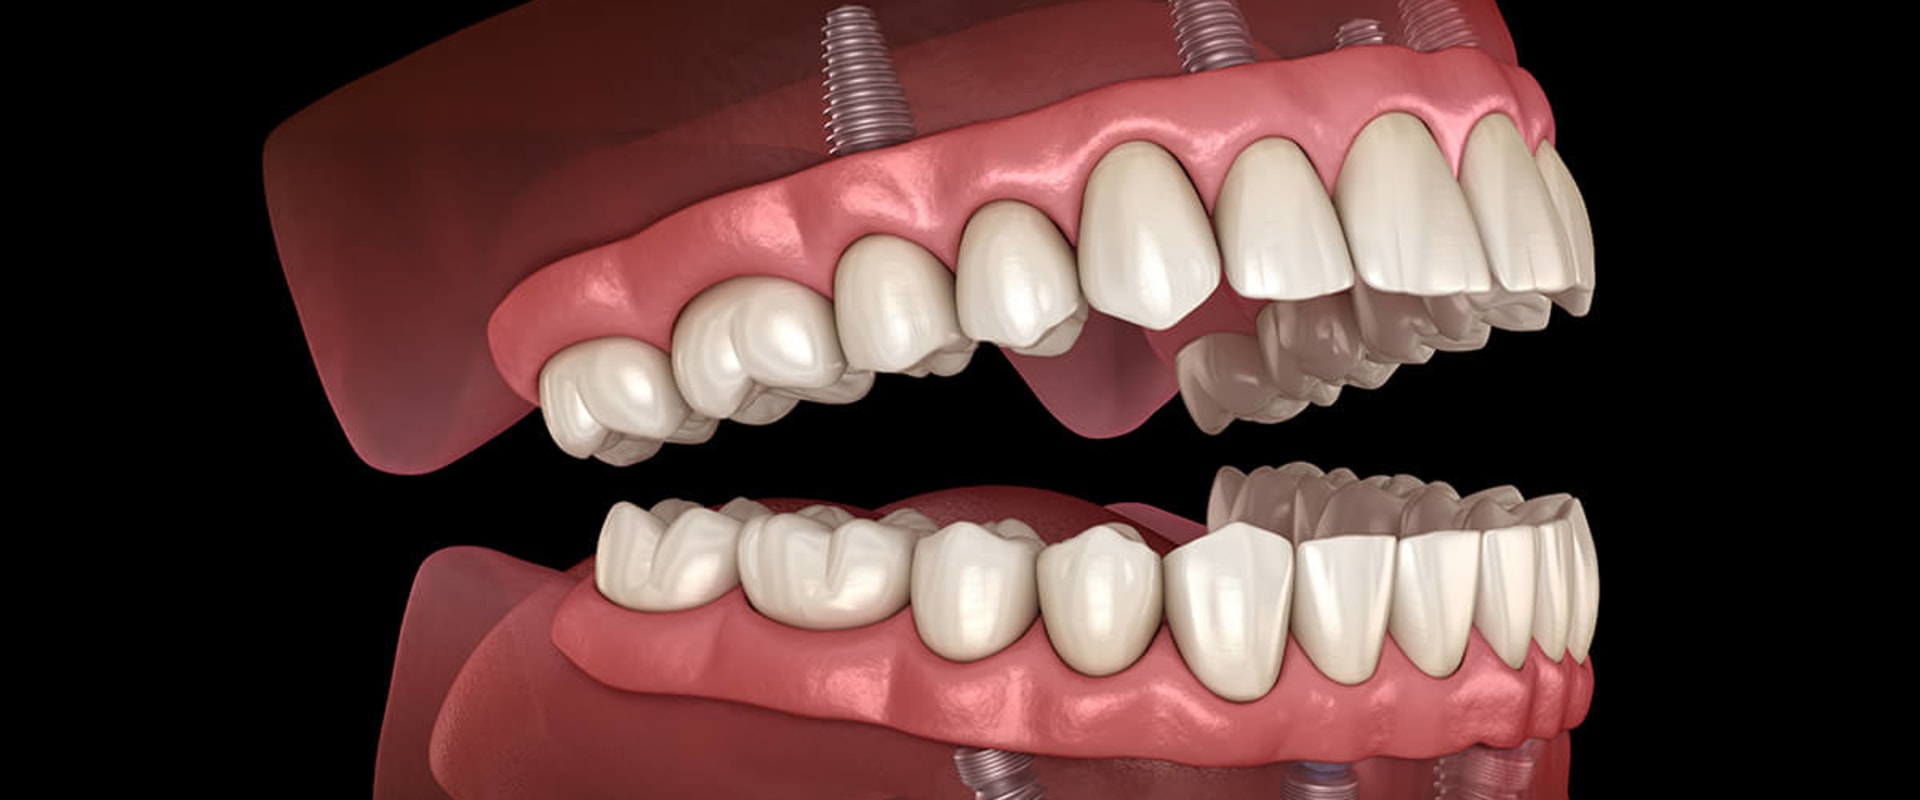 Can I Brush and Floss My Teeth with All-on-4 Dental Implants?